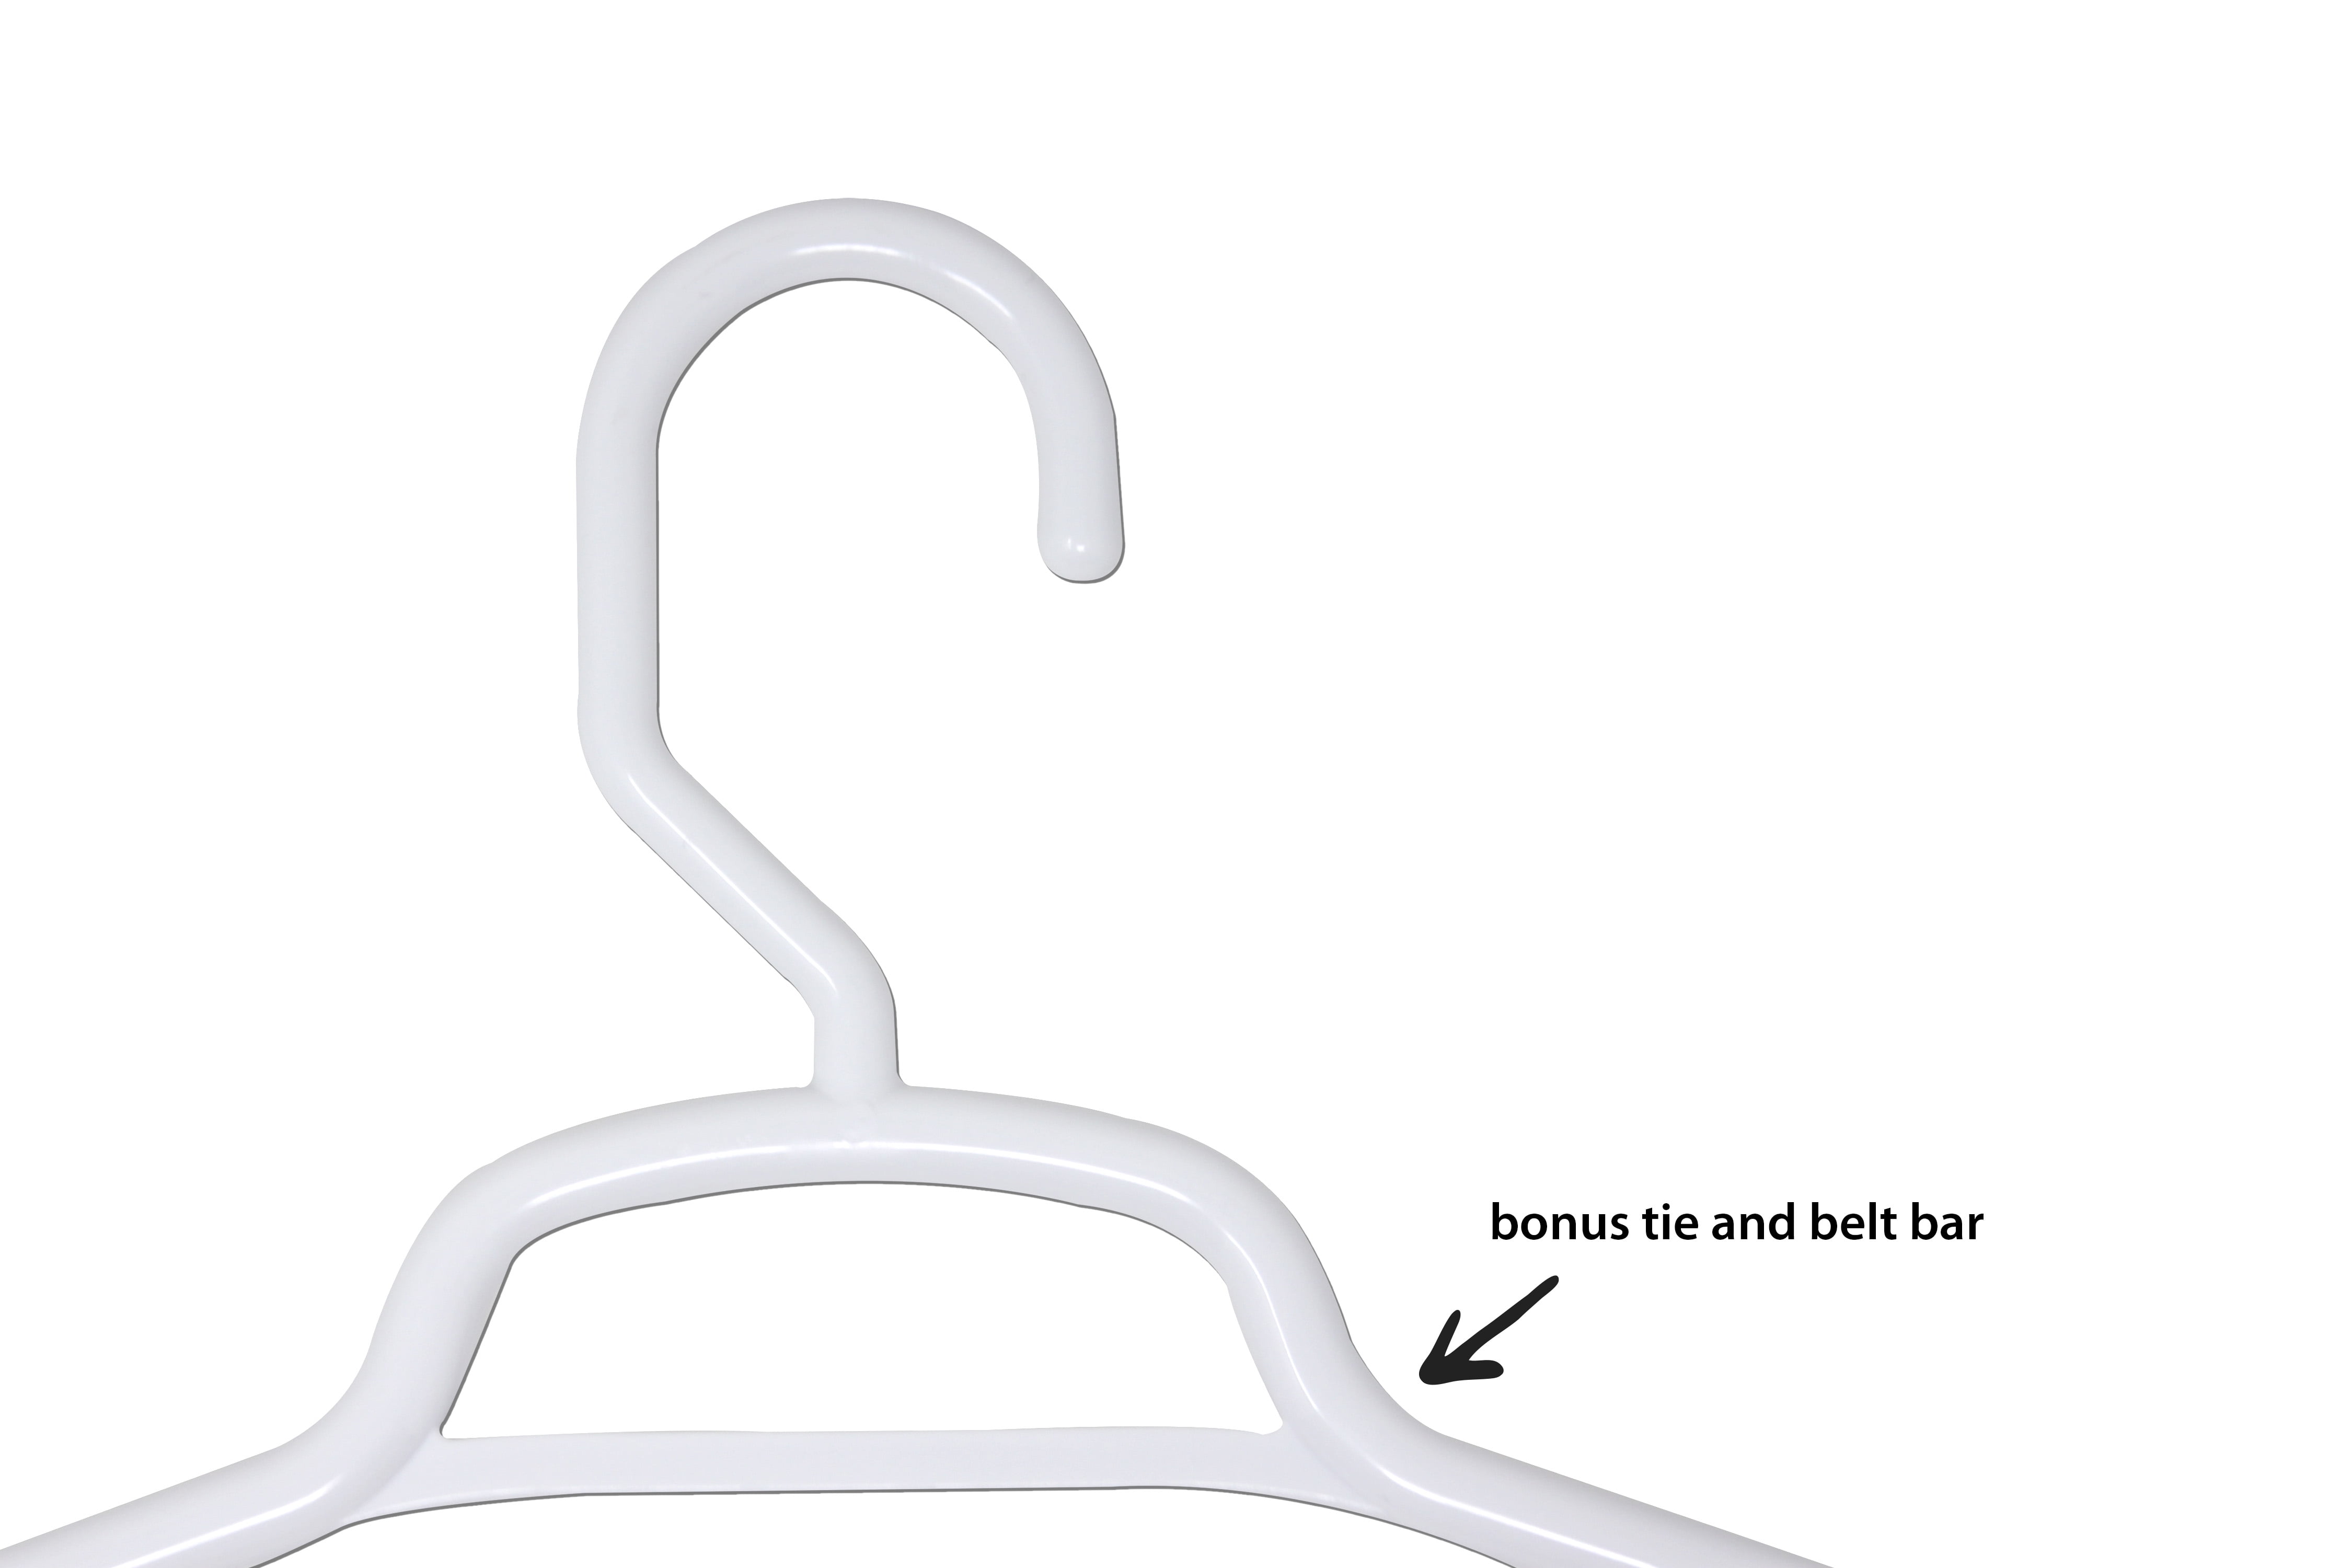 Adjustable Heavy Duty Plastic Extra-Wide Bumpless Clothes Hangers